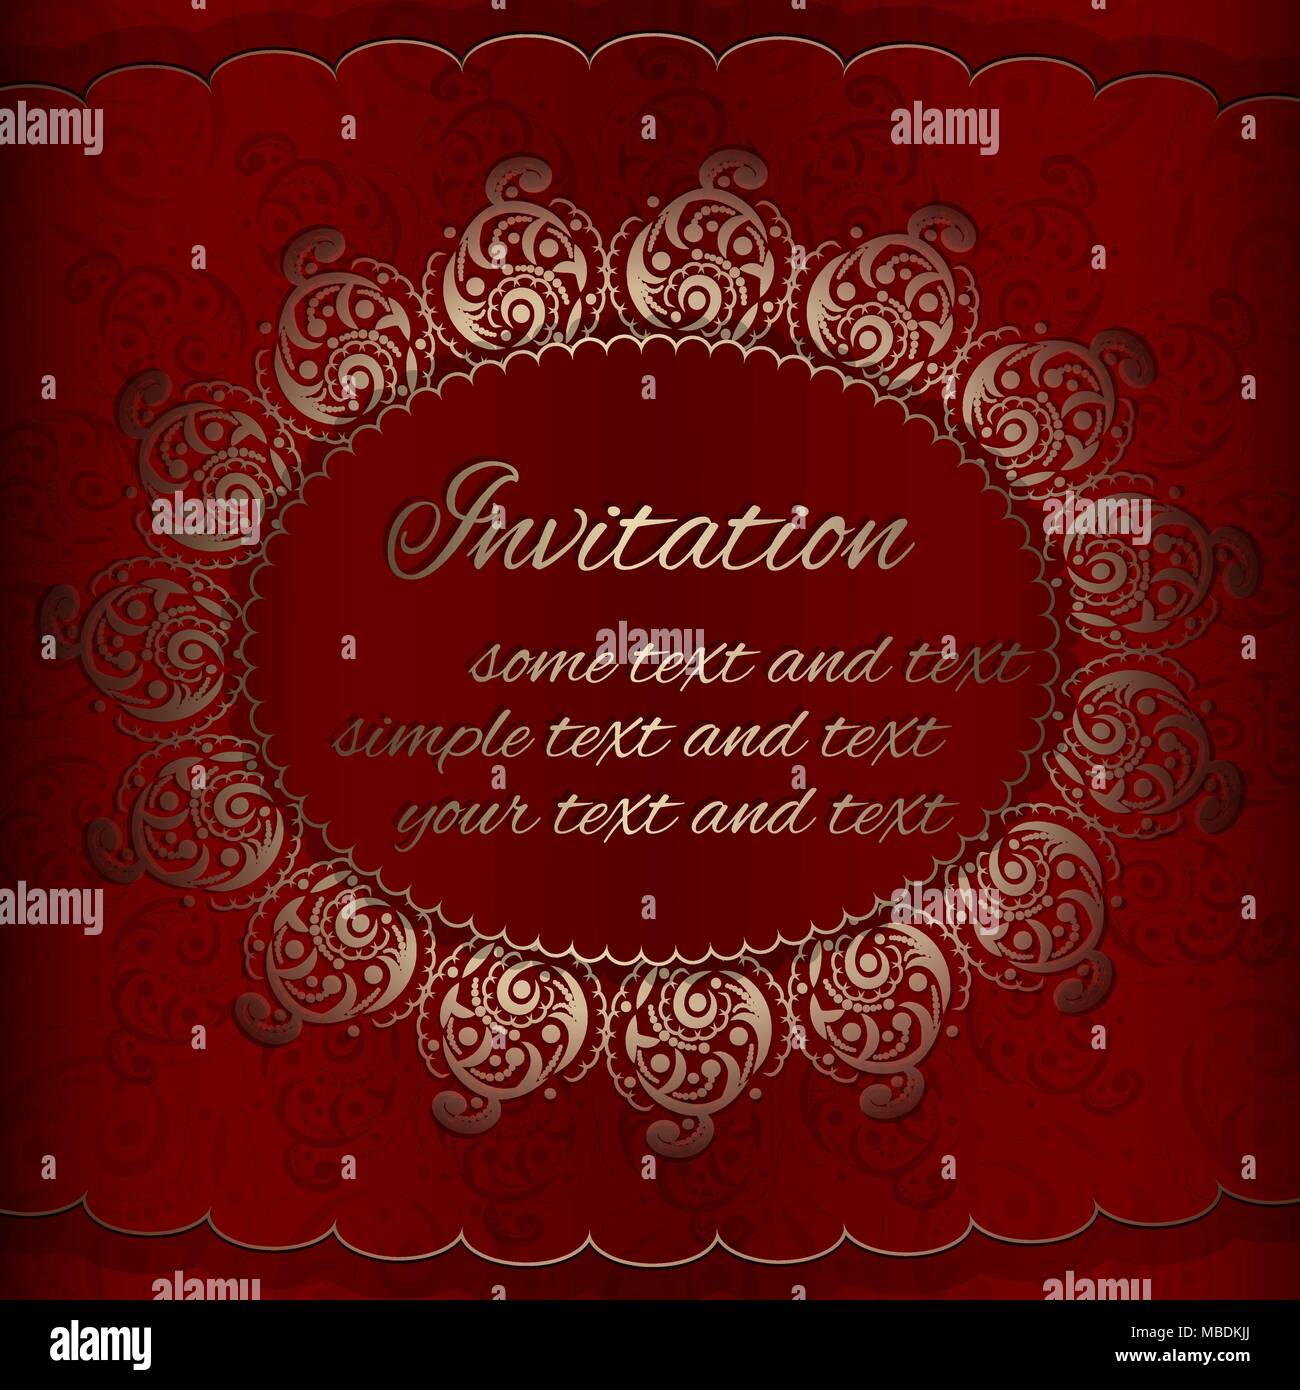 Vector Invitation card in red and gold. Stock Vector